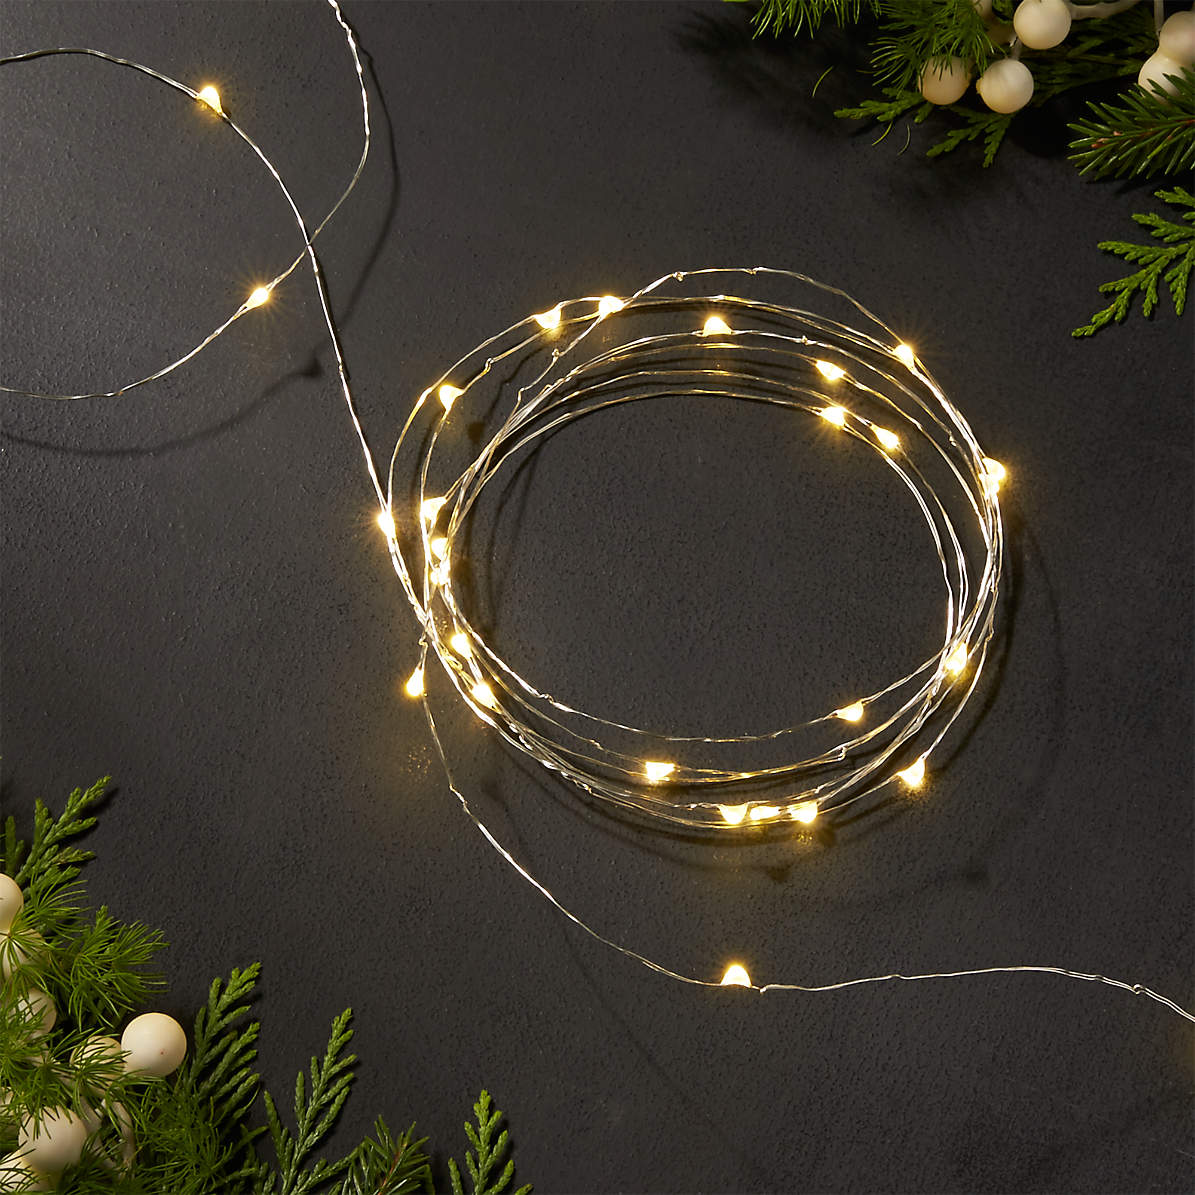 Twinkle Silver 10' Outdoor String Lights + | Crate Barrel